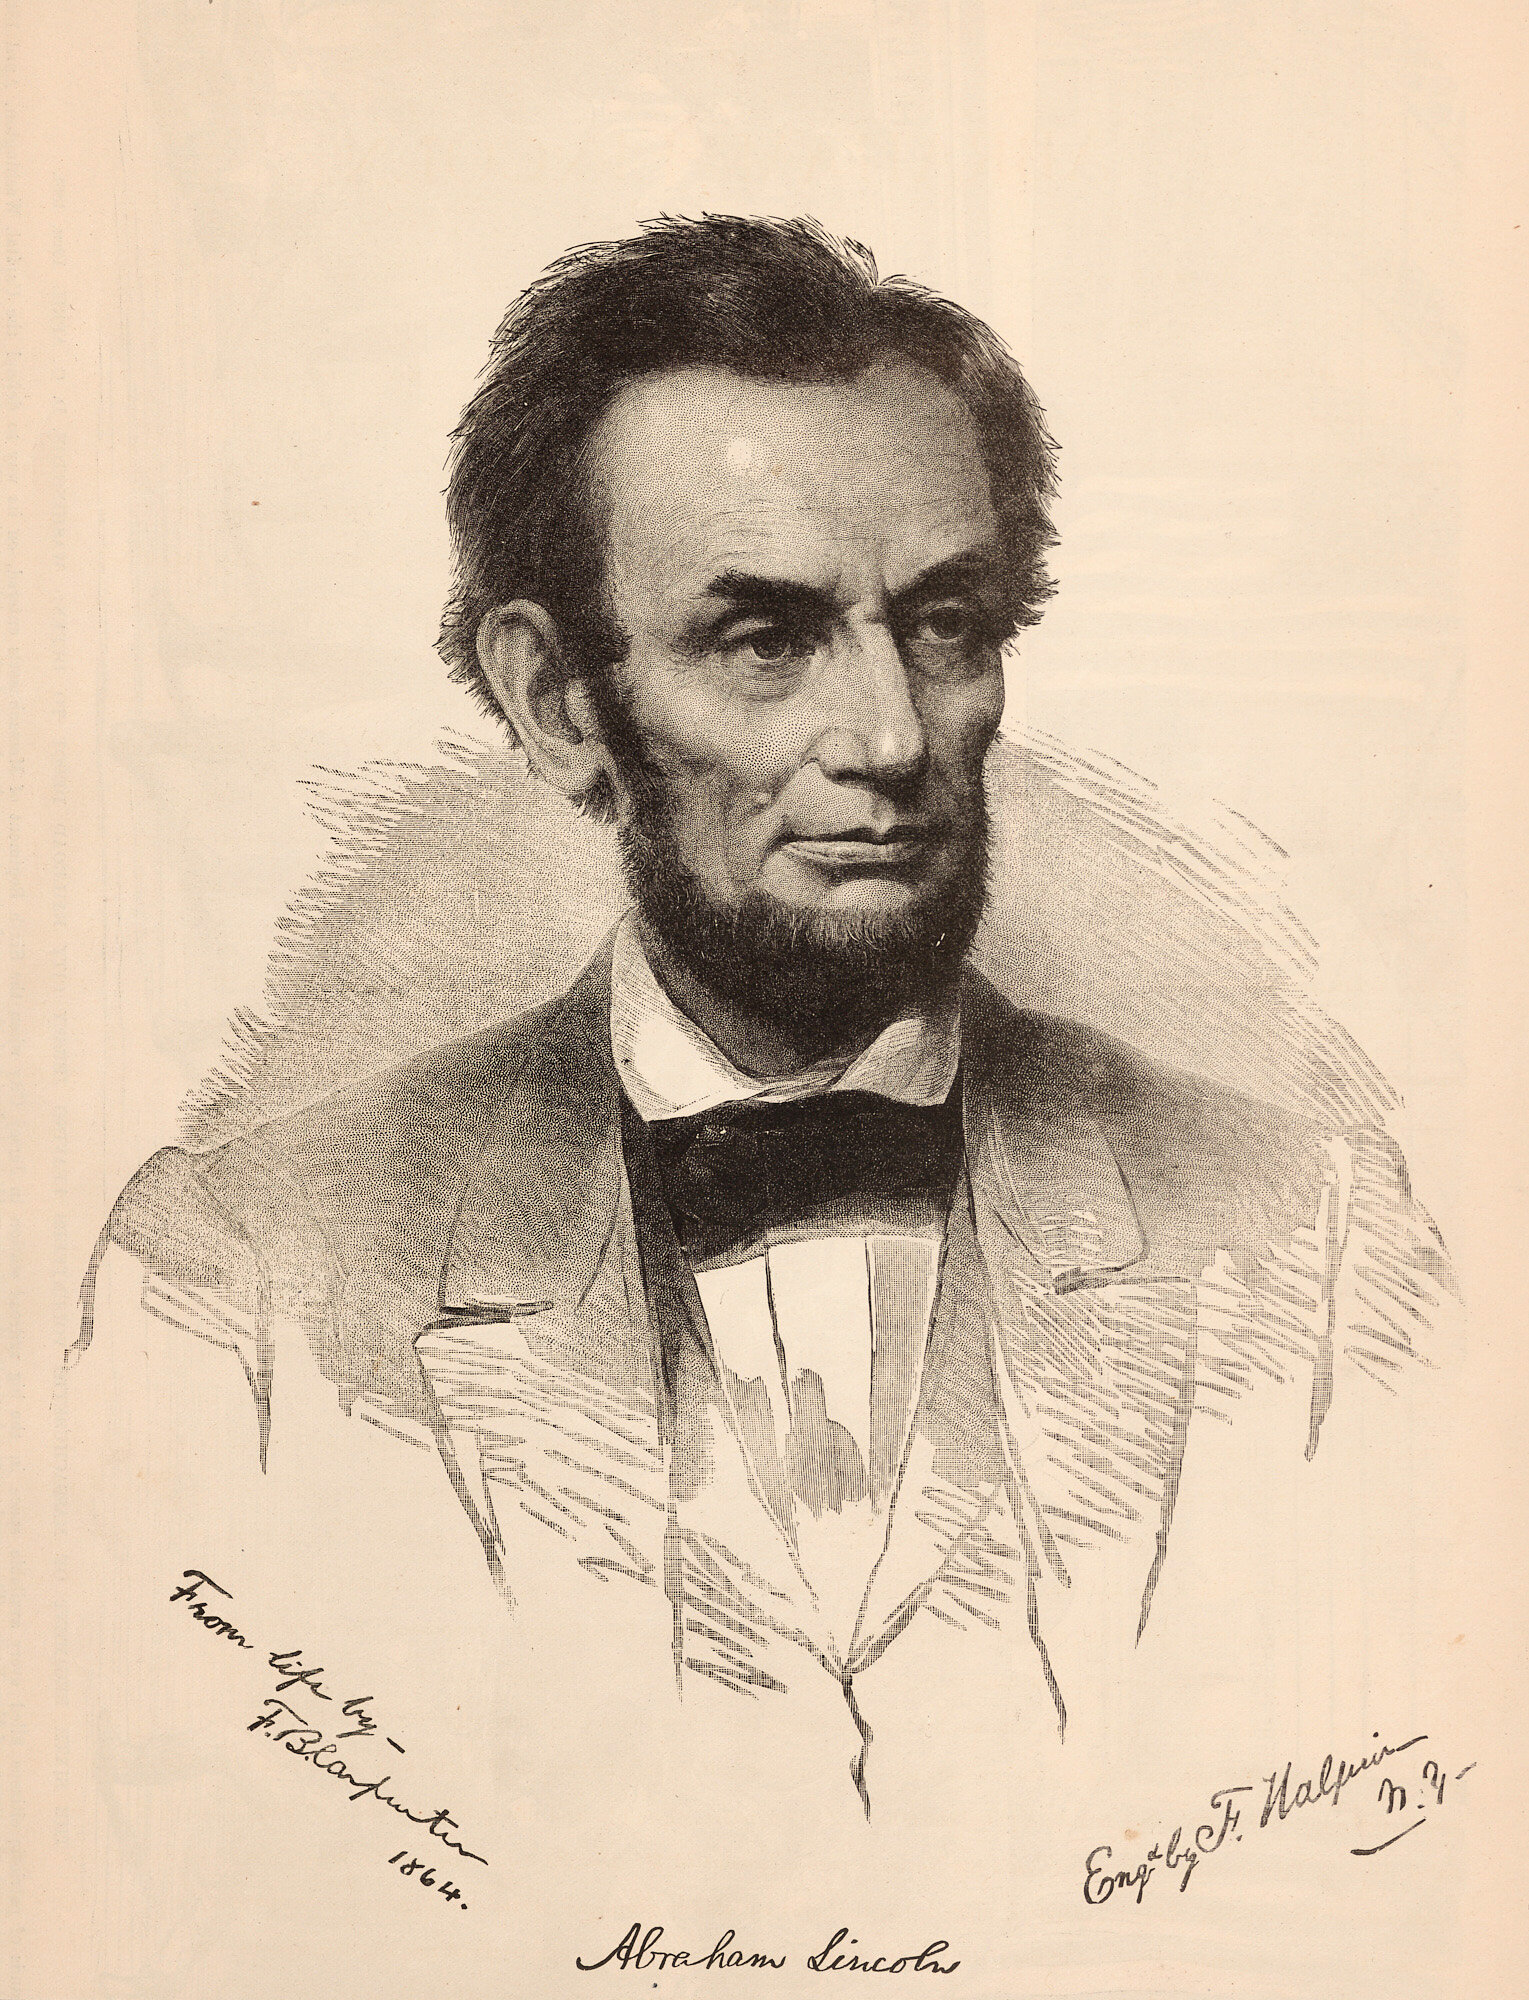  F. Halperin   Abraham Lincoln   Engraving, 1866, 13” x 10”  Based on a drawing from life by F.B. Carpenter, 1864   Gift of Ciro Galeno, Jr.  